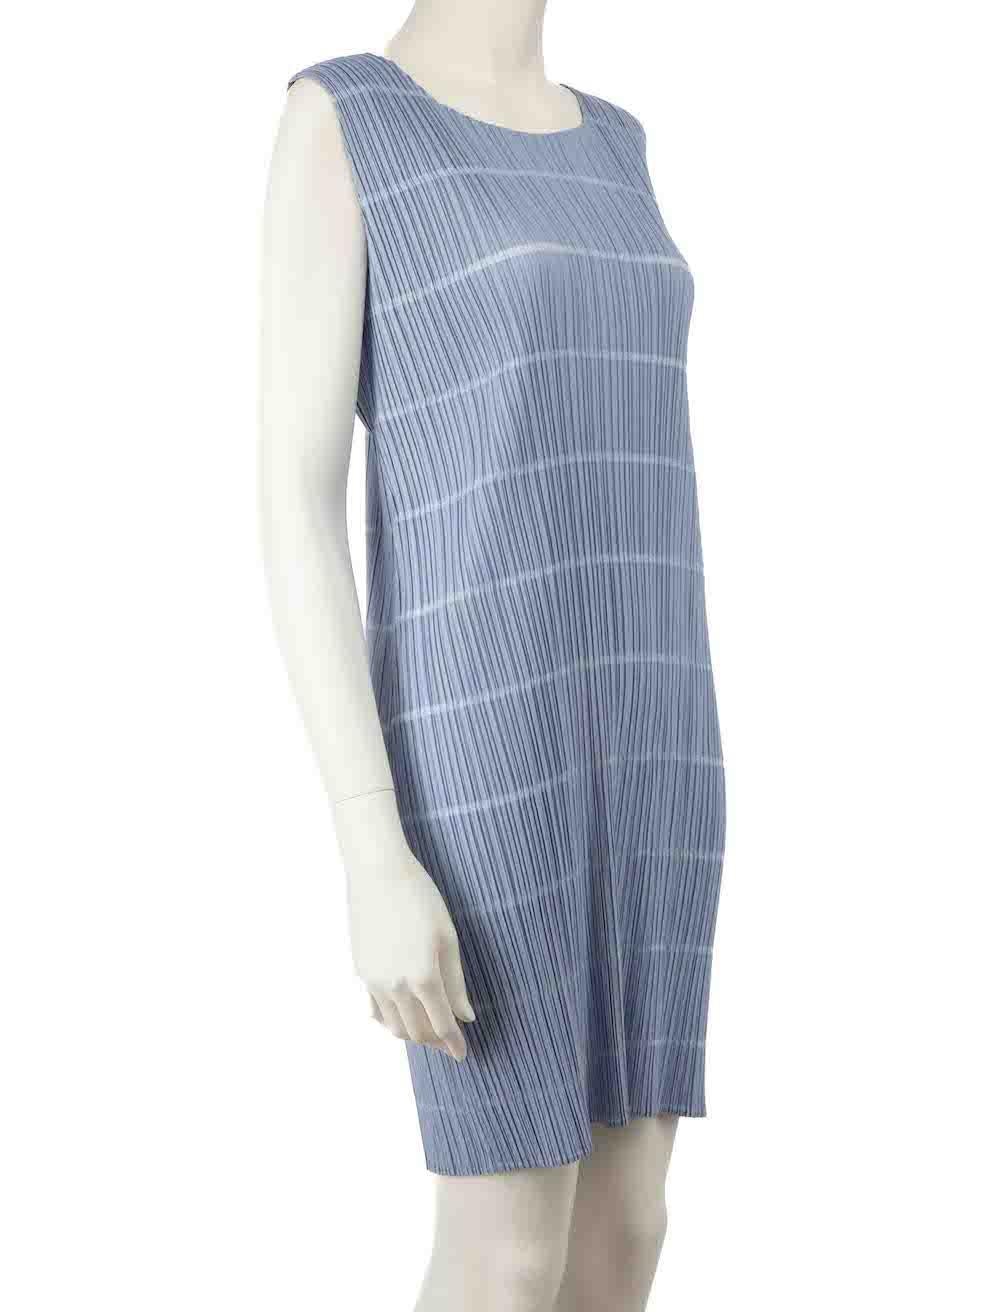 CONDITION is Very good. Minimal wear to dress is evident where a stain is seen on the front neckline on this used Issey Miyake Pleats Please designer resale item.
 
 Details
 Blue
 Polyester
 Mini dress
 Bodycon and stretchy
 Round neckline
 Plissè